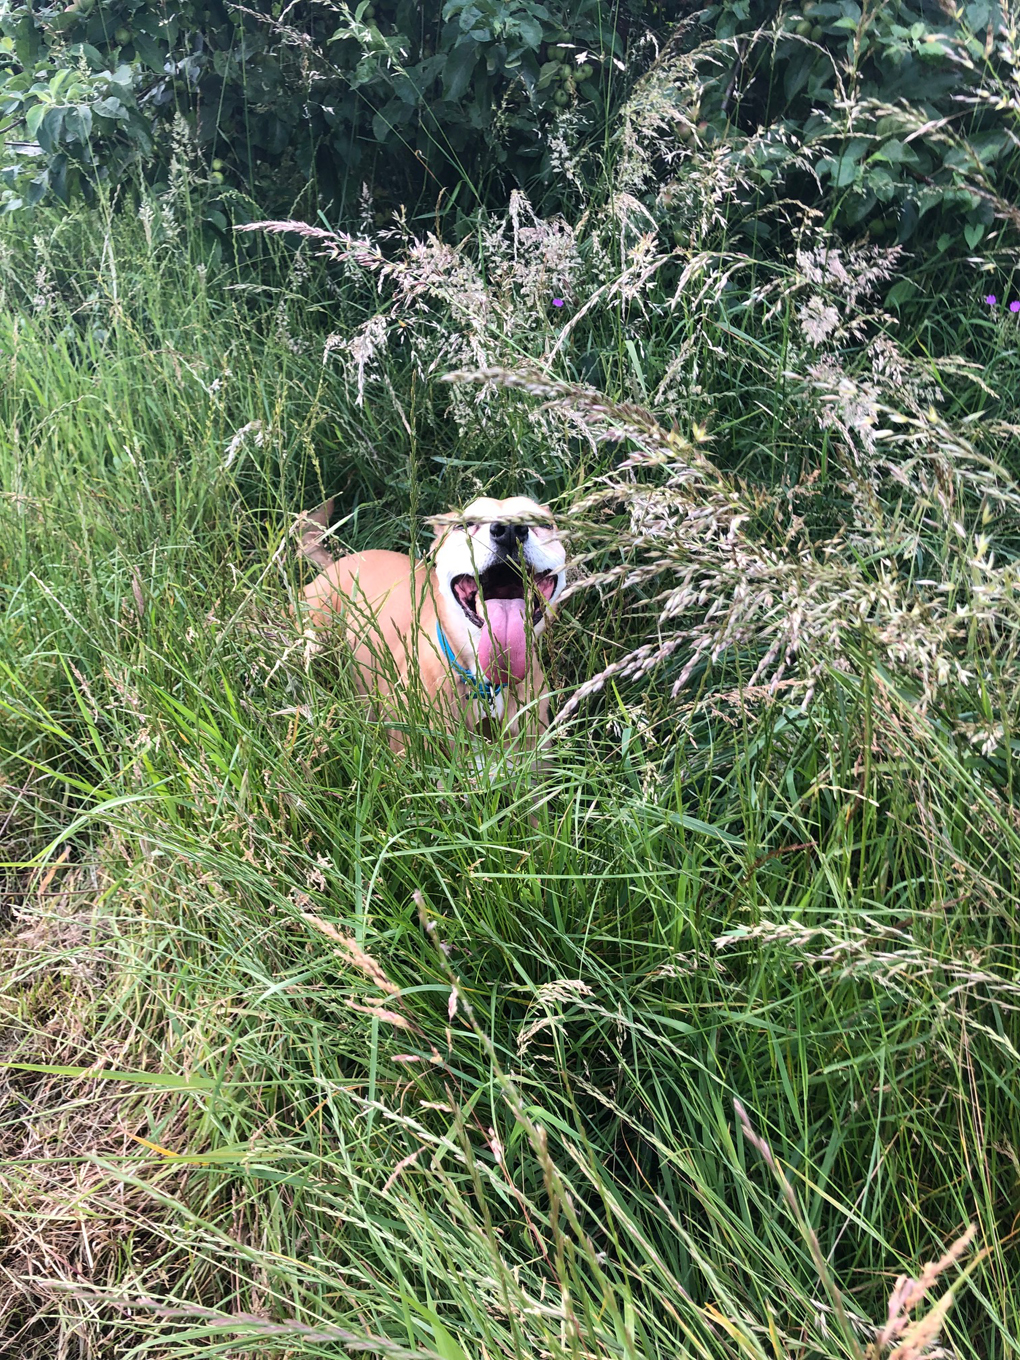 A hot but happy dog laying in some long grass